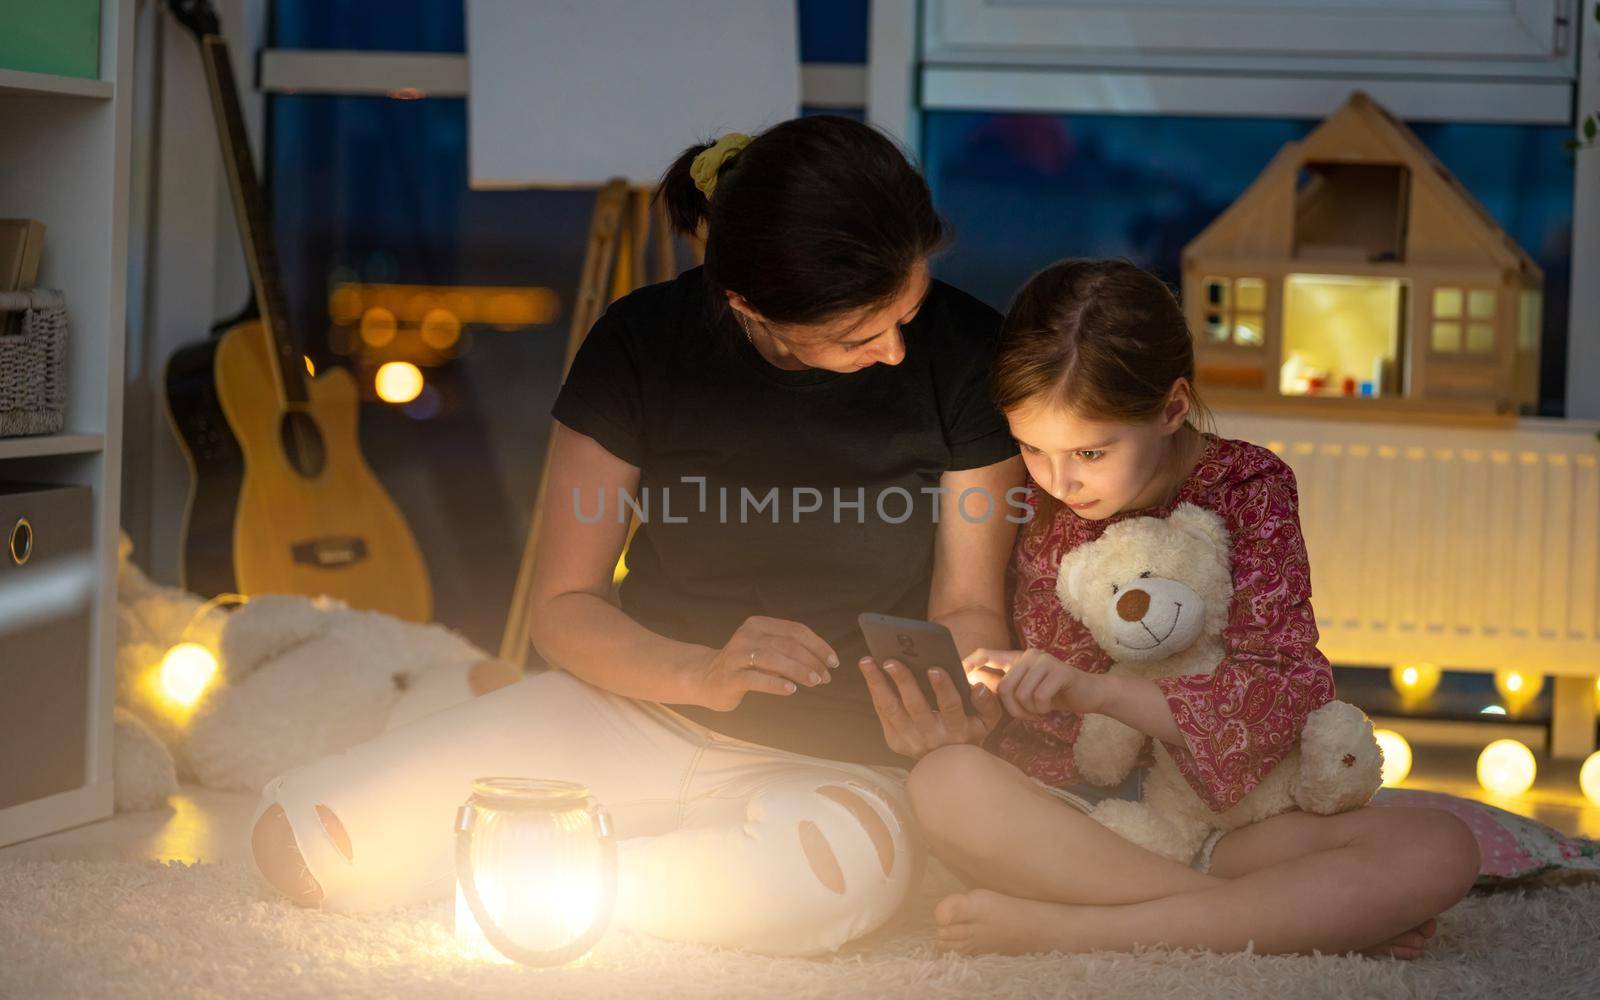 Mother showing phone to little daughter sitting on floor in playroom at night